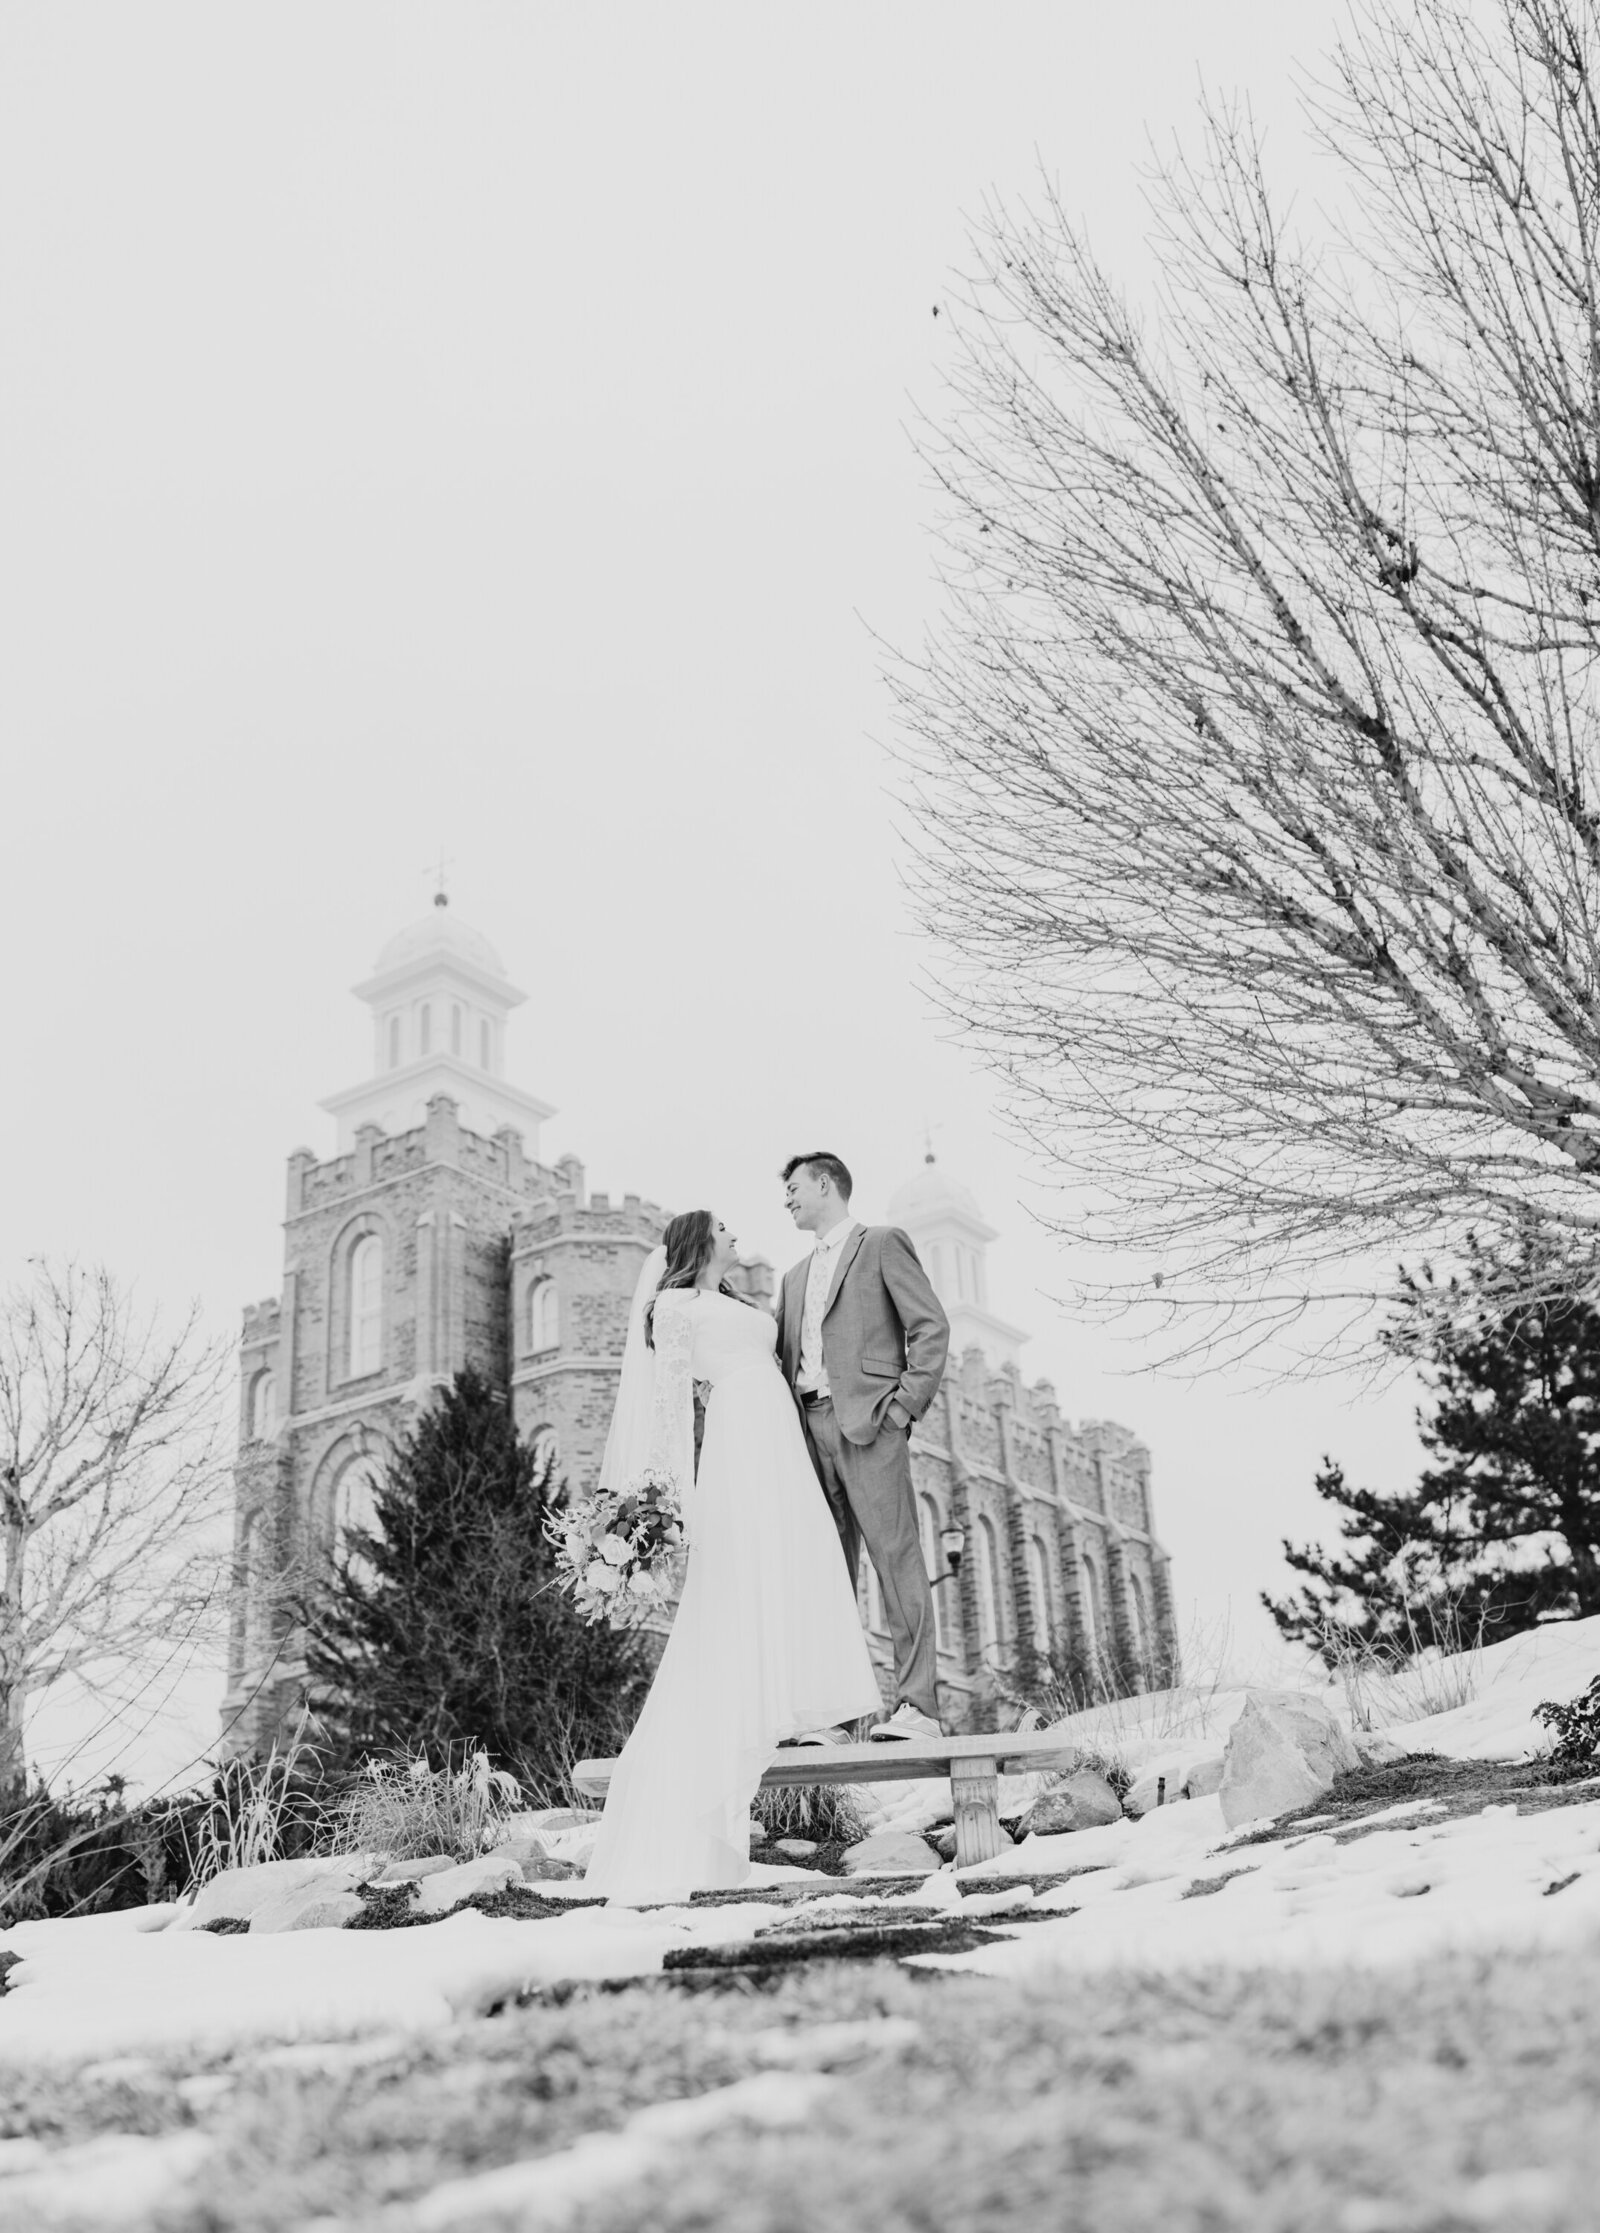 These photos were taken at the Mt Timpanogos Temple in Utah Valley by Utah Wedding Photographer Robin Kunzler